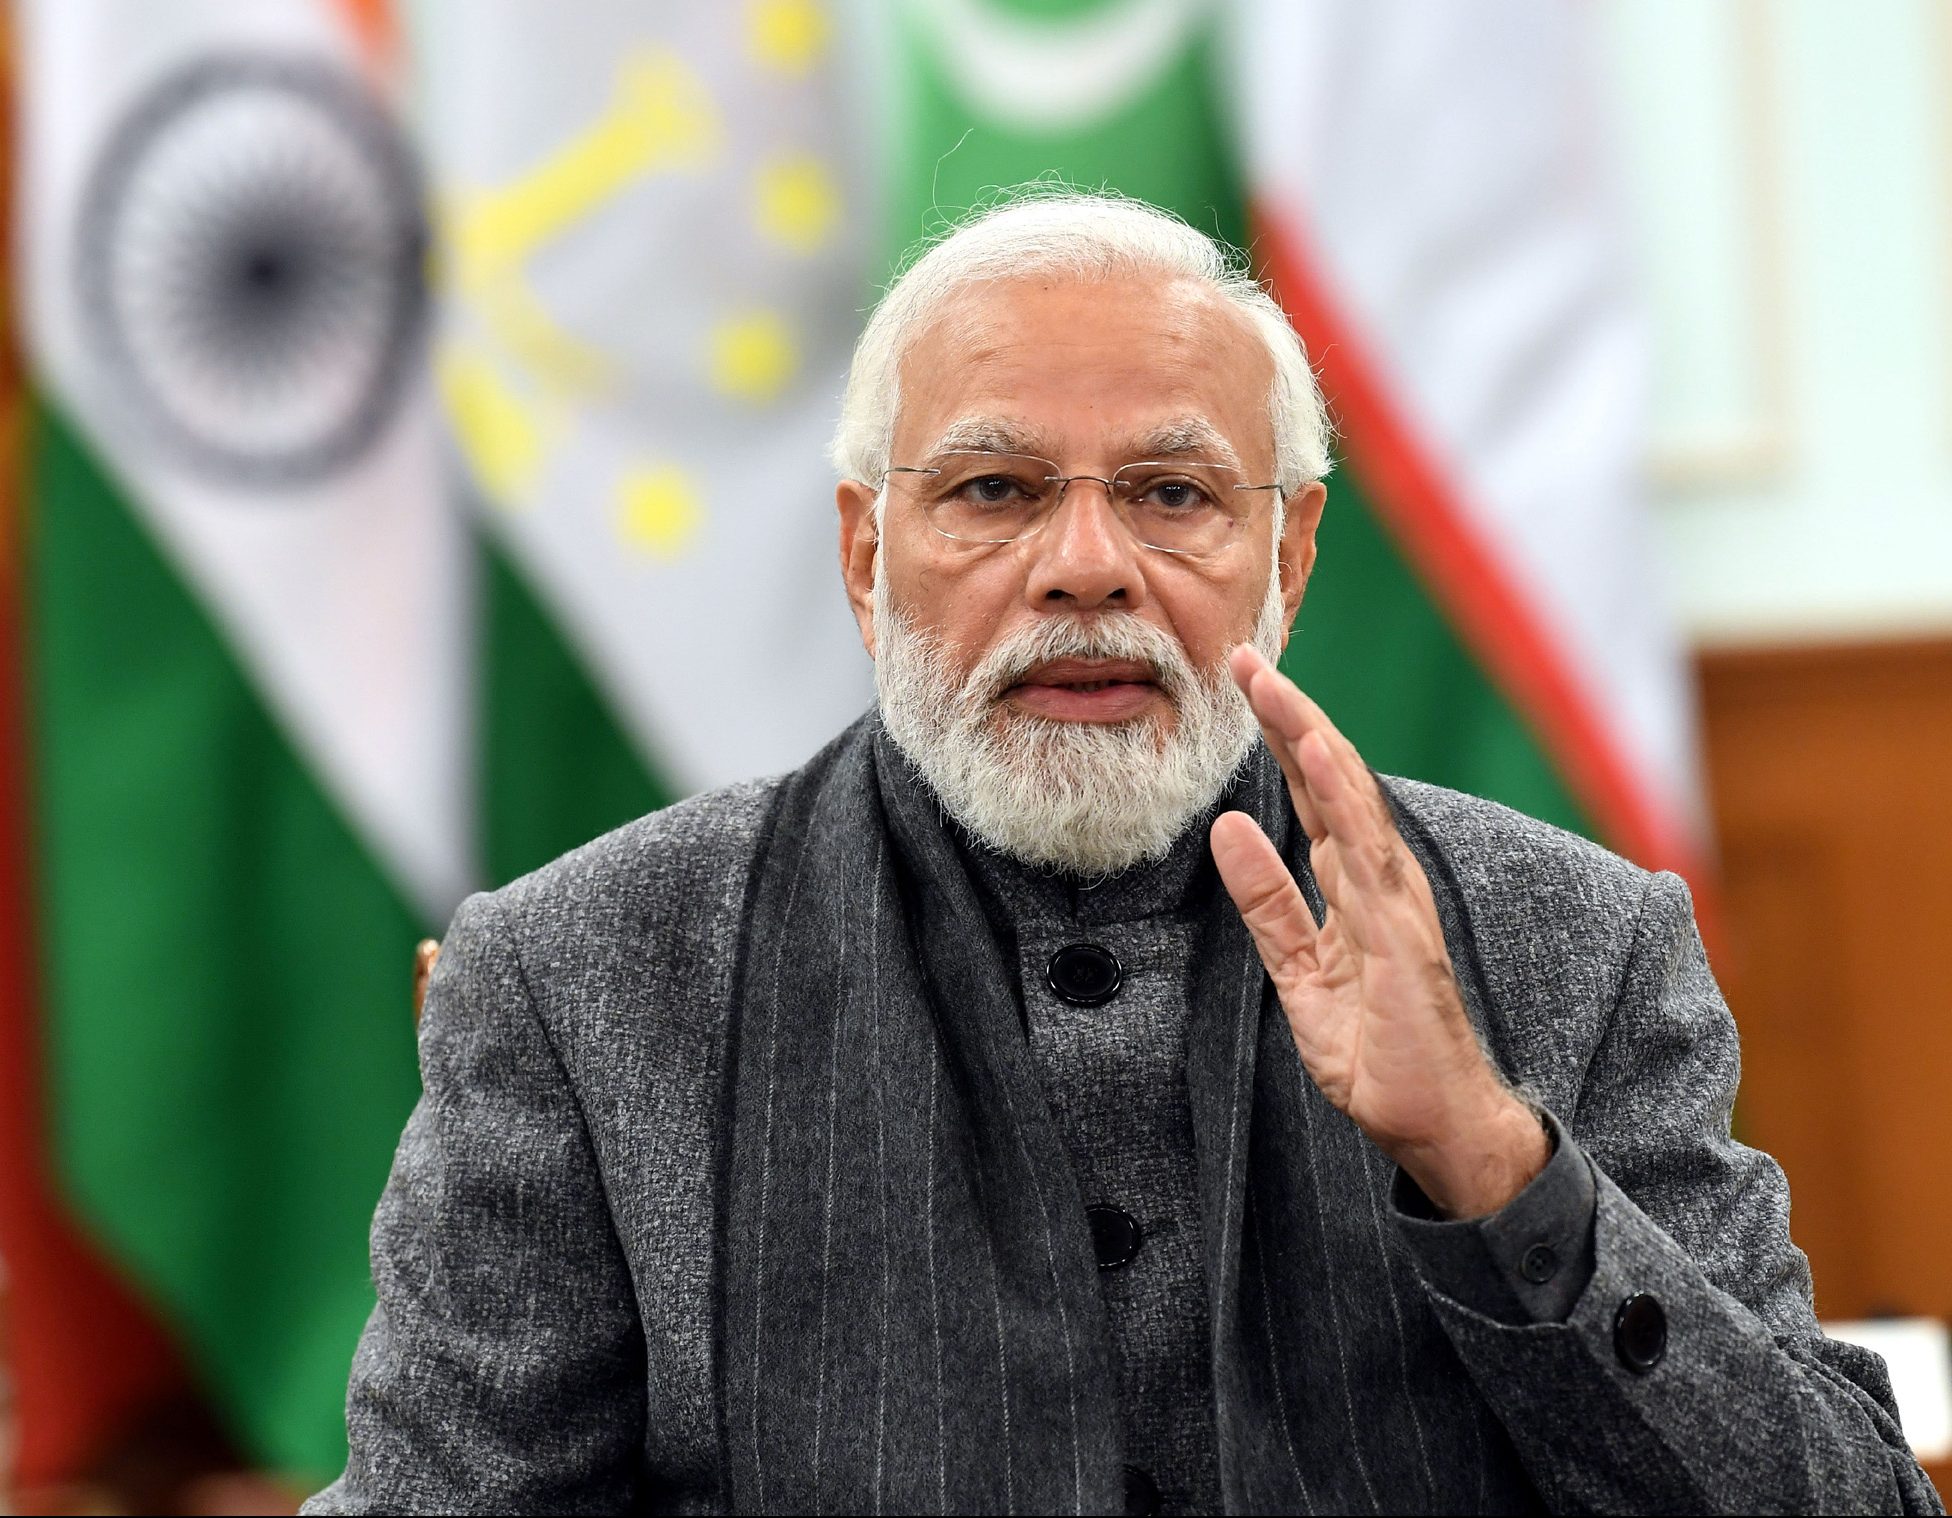 Covid: Modi Calls for Streamlining WHO’s Approval Processes